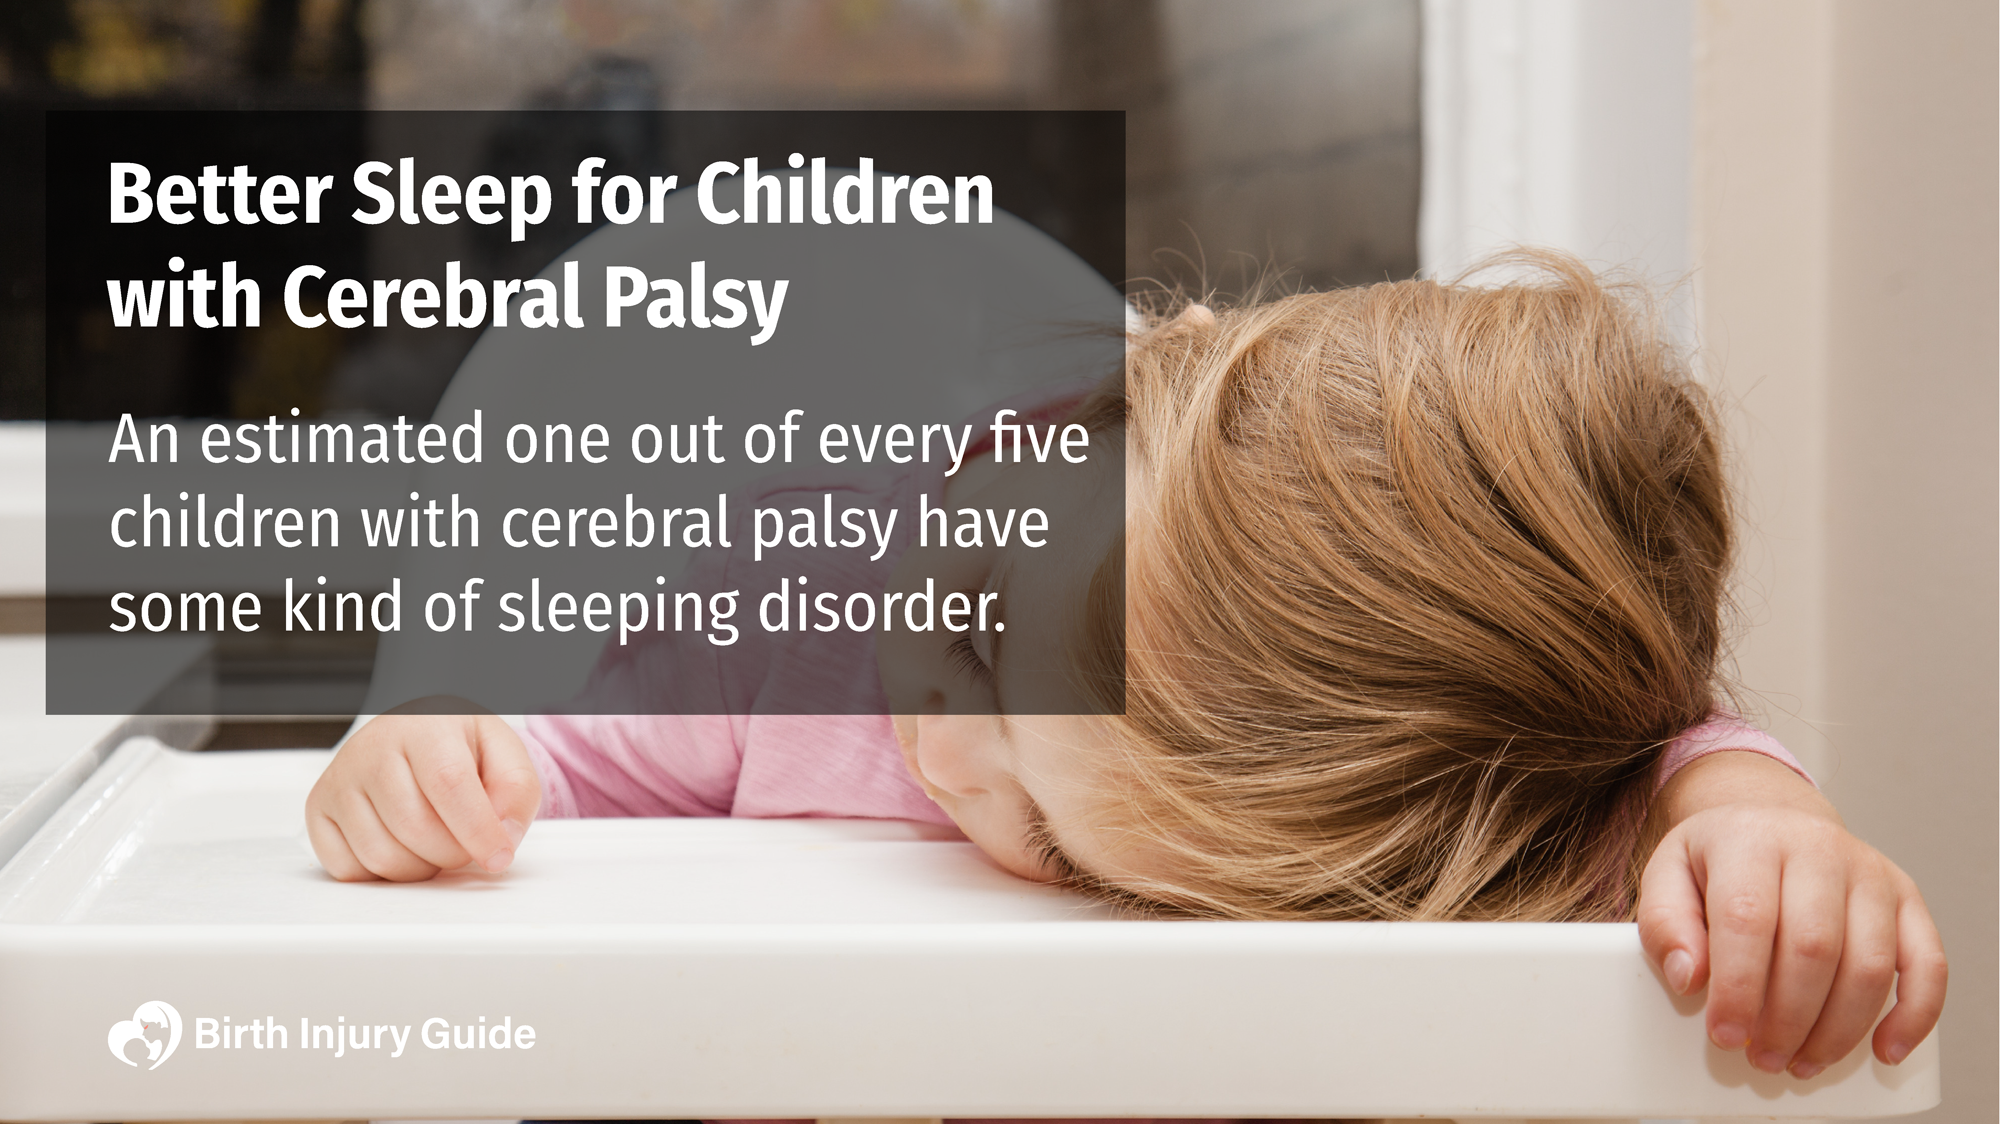 Better Sleep for Children with Cerebral Palsy